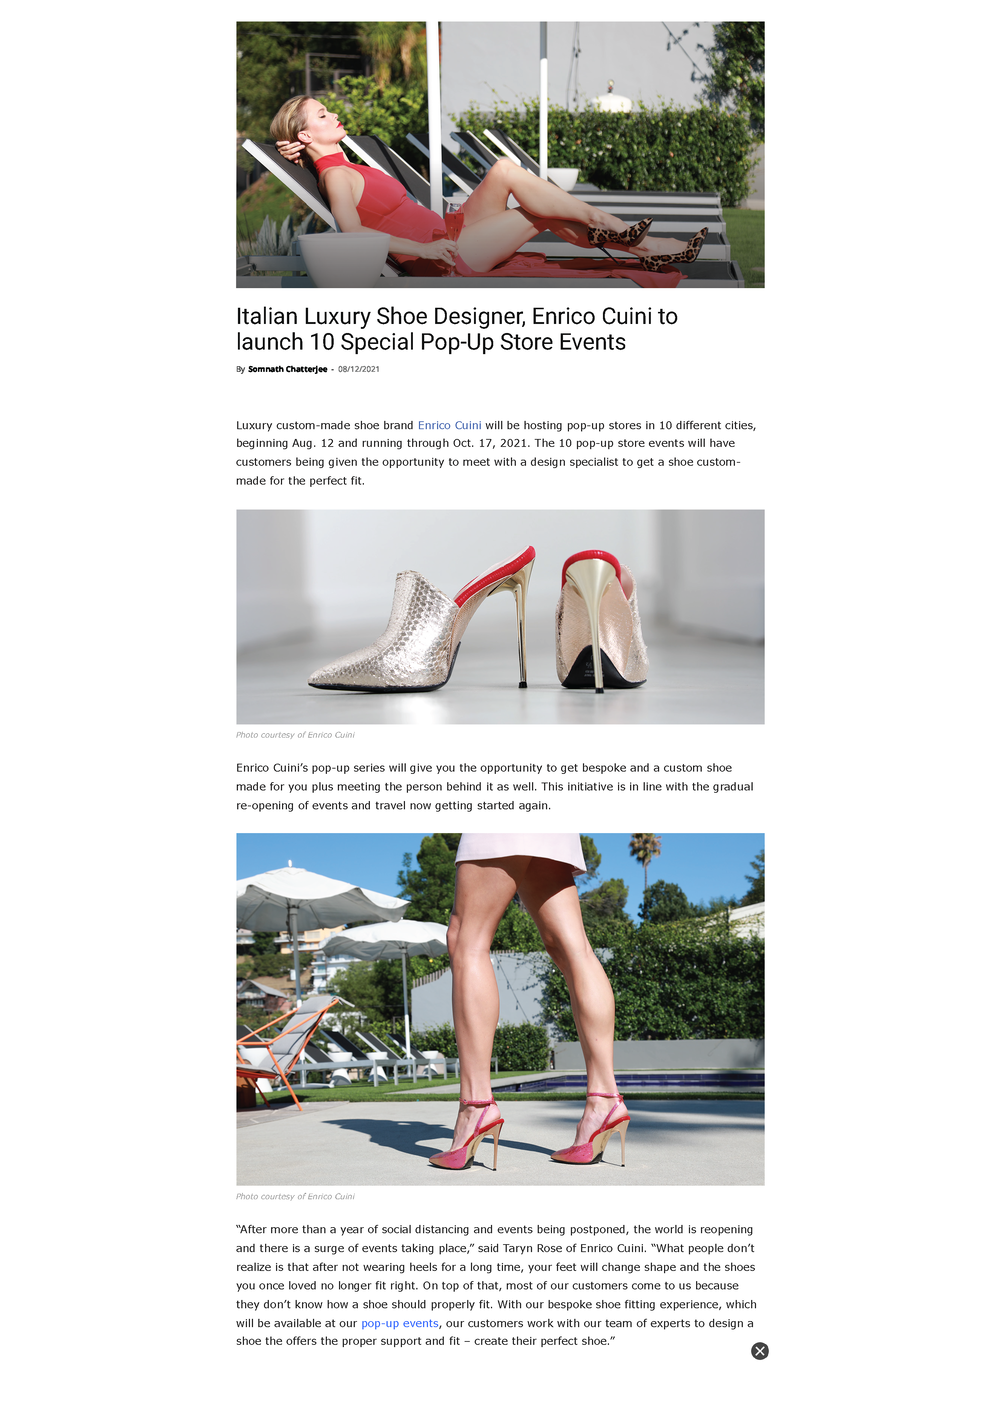 Italian Luxury Shoe Designer, Enrico Cuini to launch a store event_Page_1.png